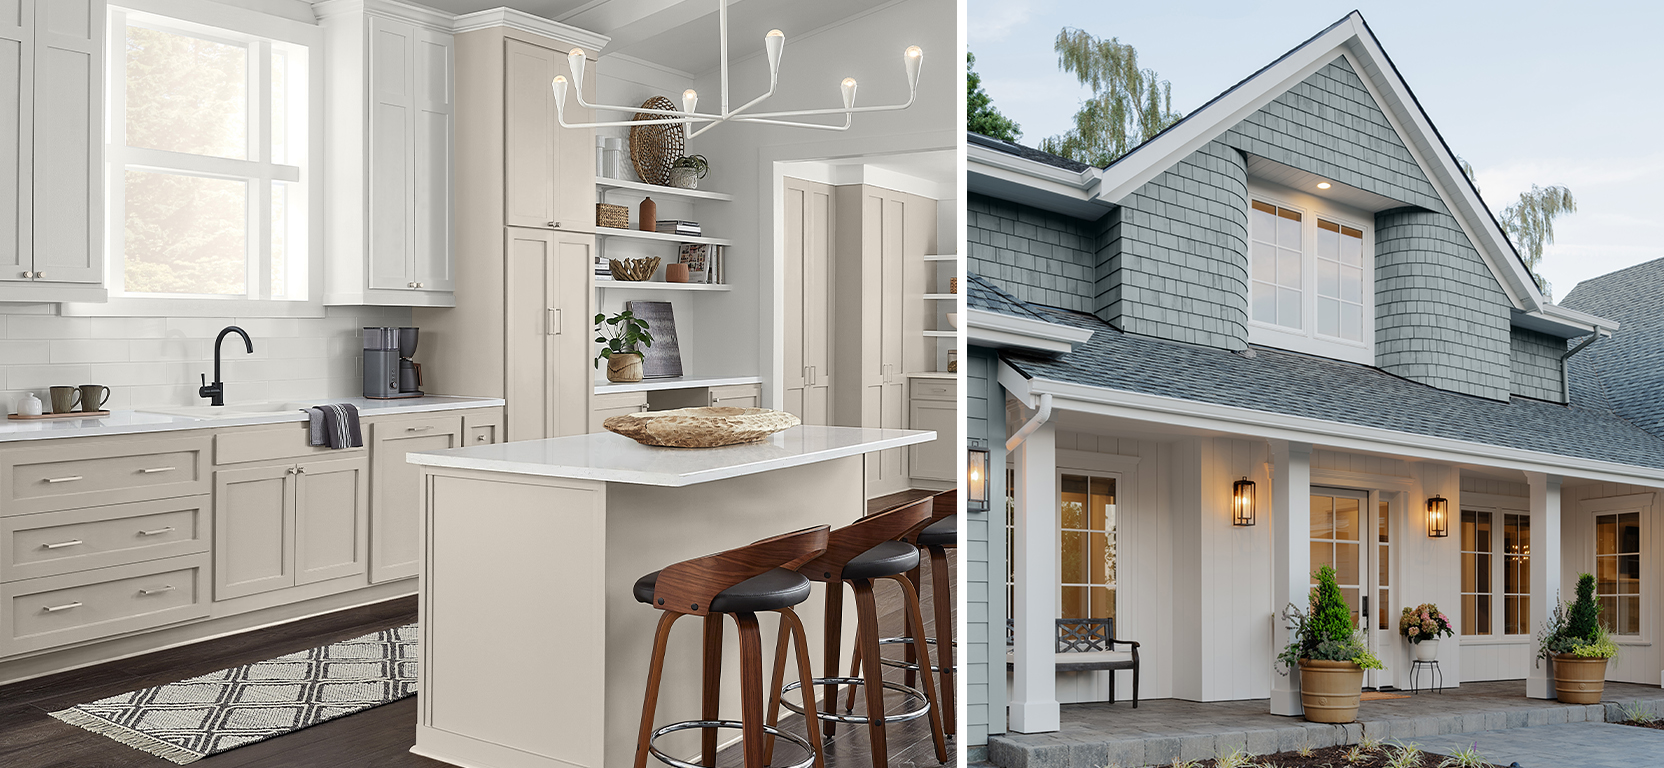 First image: Light neutral kitchen with wooden stools at island counter and dark wood floors. Second Image: Exterior facade of new residential construction home with mix of white and gray siding and greenery in planters on open porch.